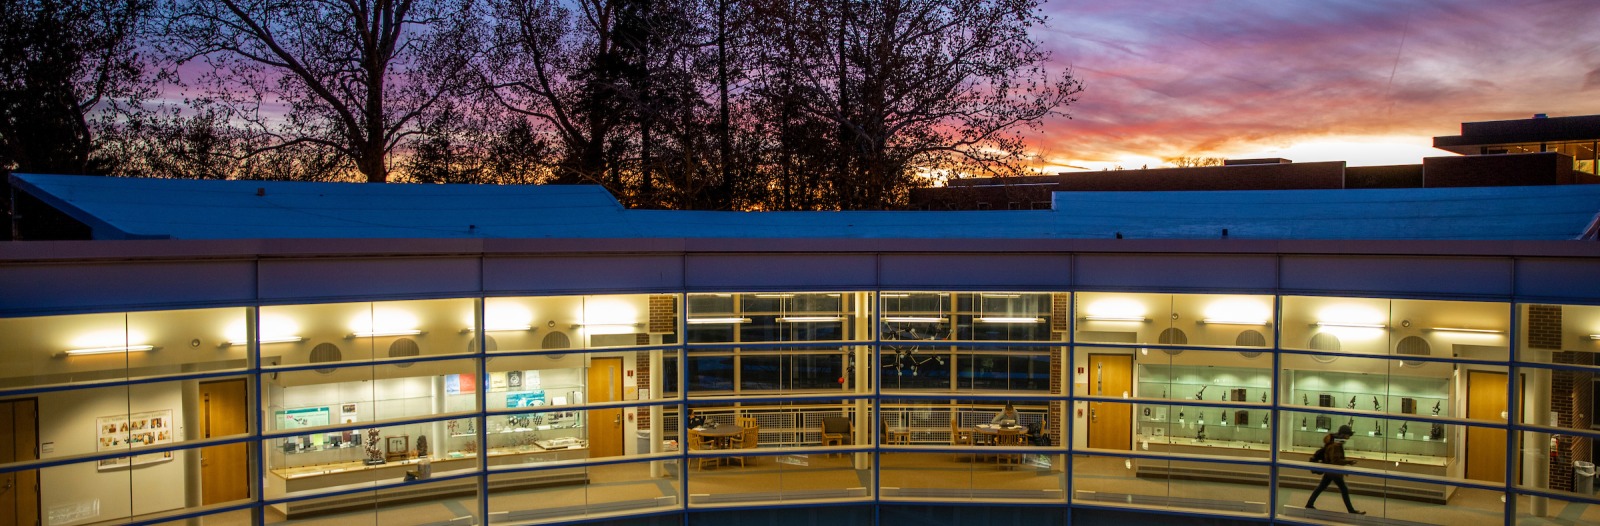 Sunset over the Noyce Science Center's "Elbow" where students are seen studying through a wall of windows